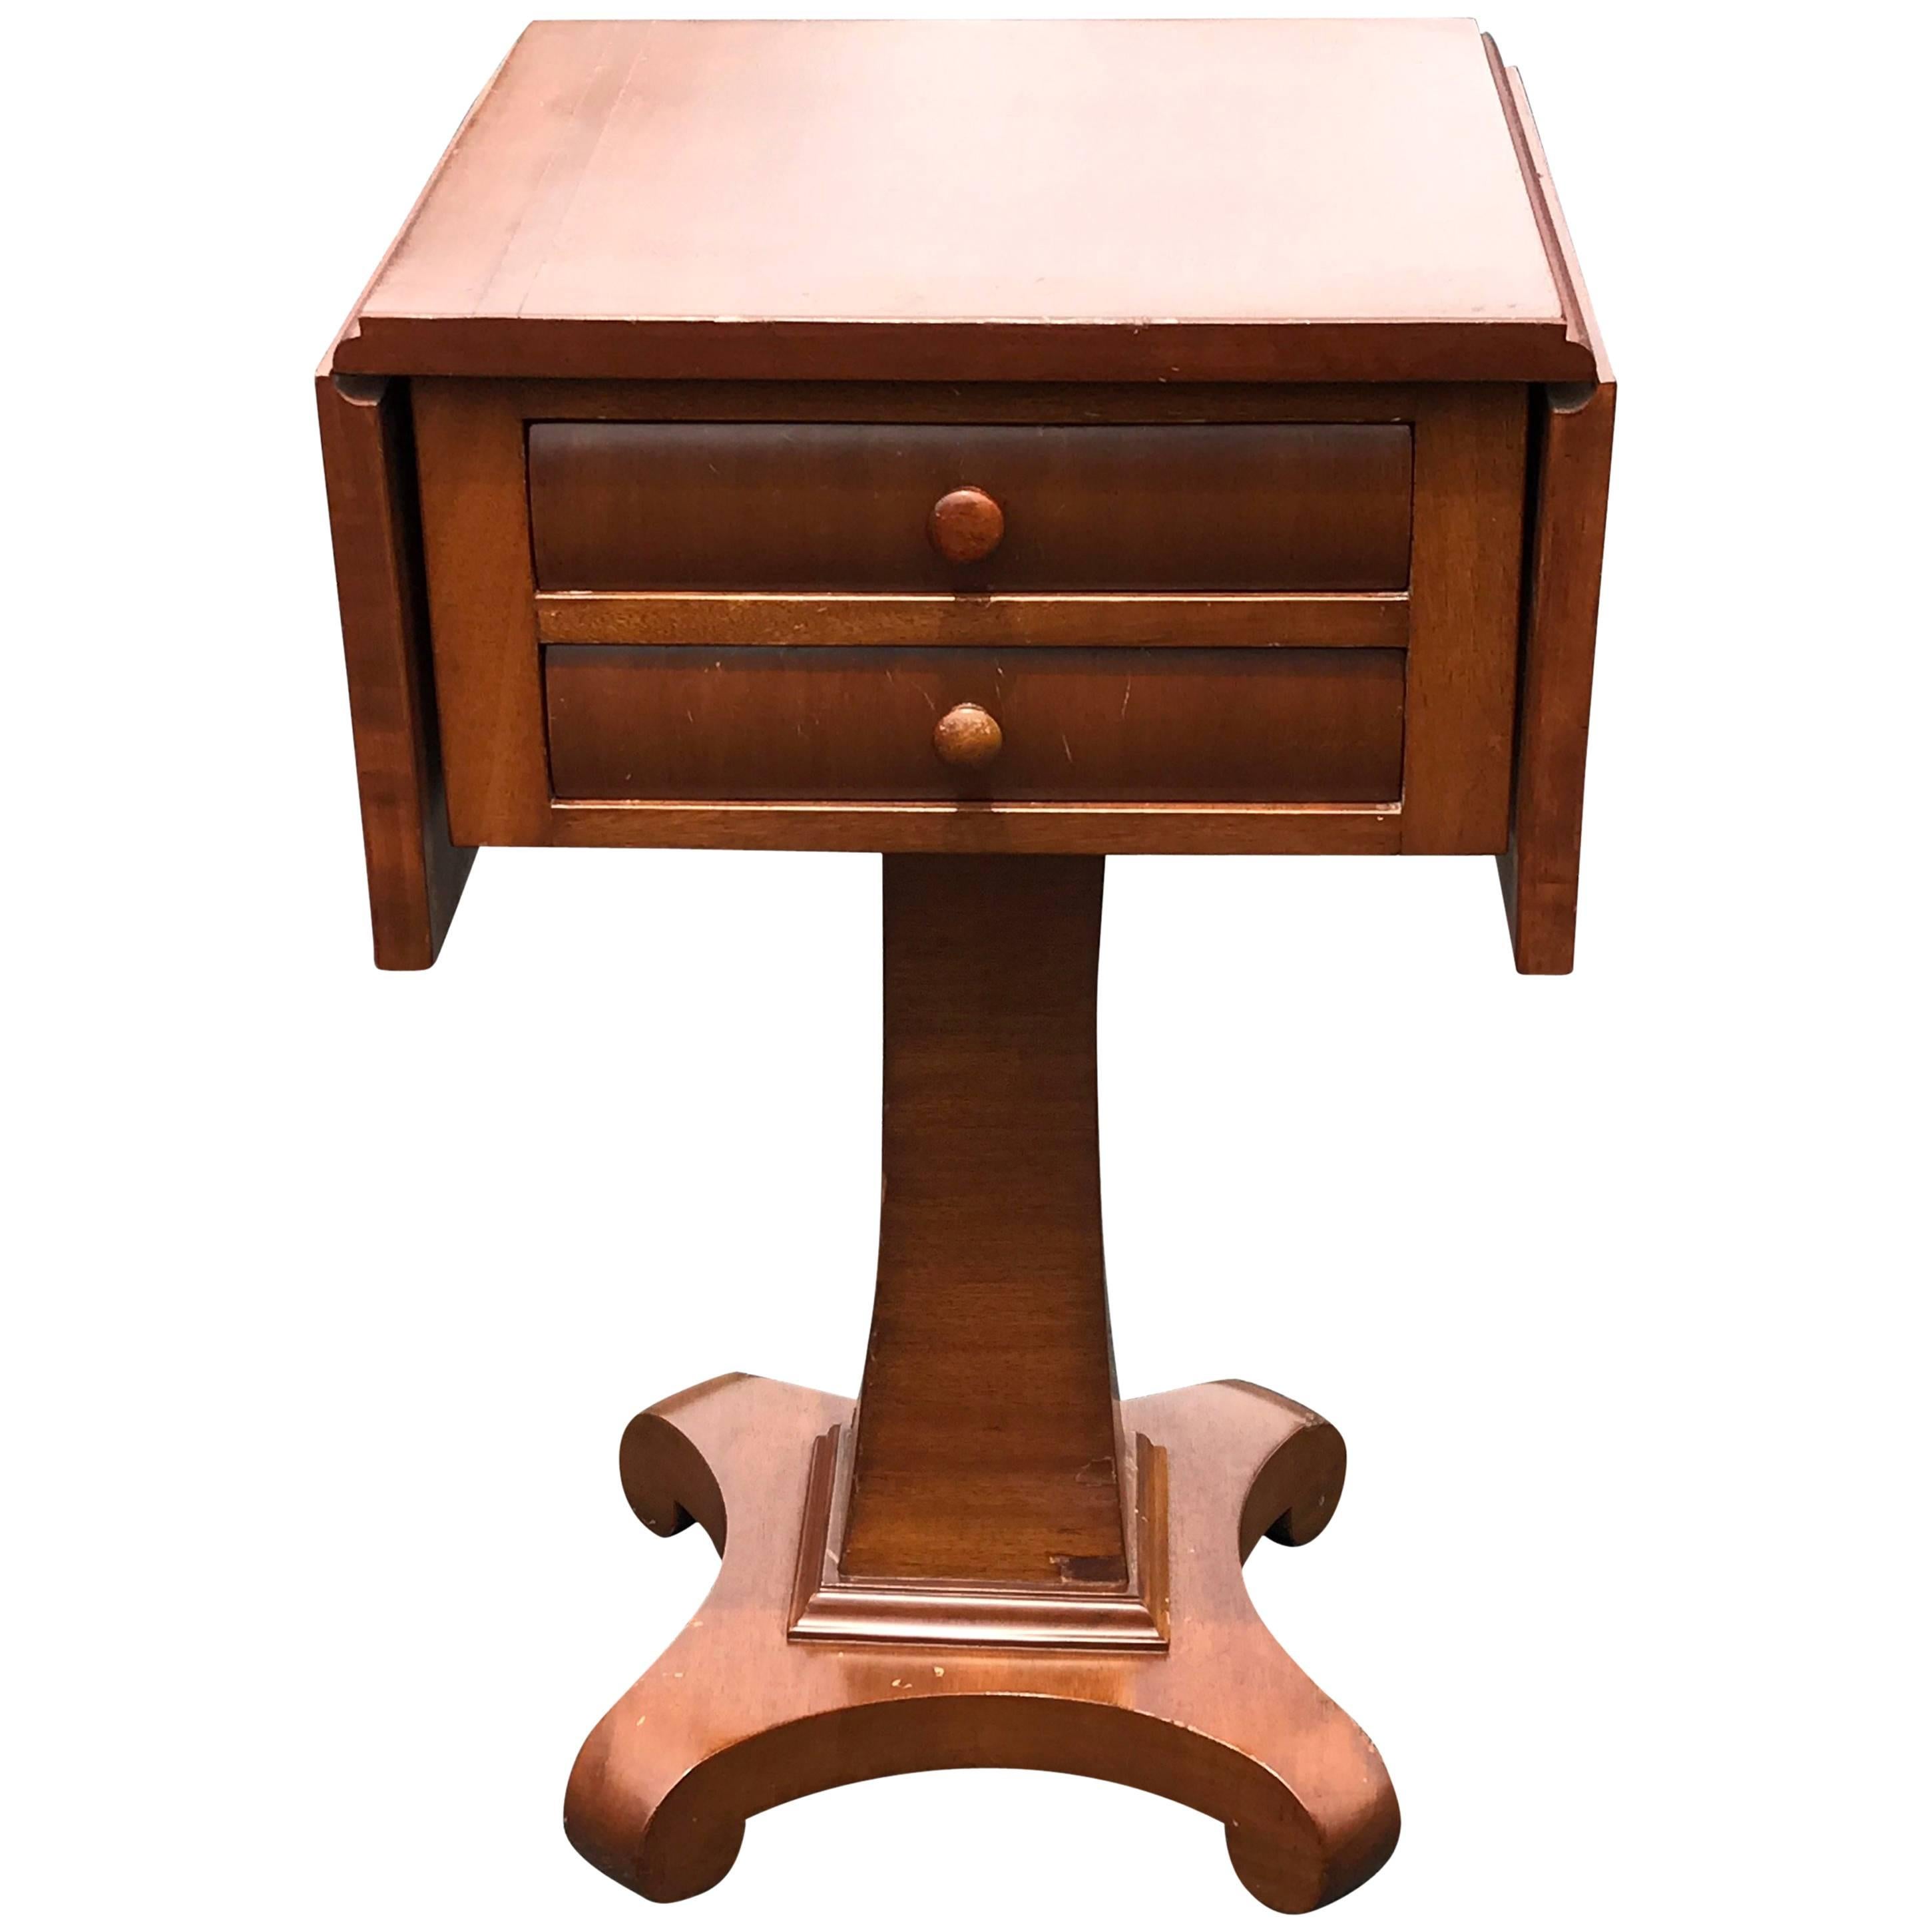 1930s English Flip-Top Side Table with Drawers